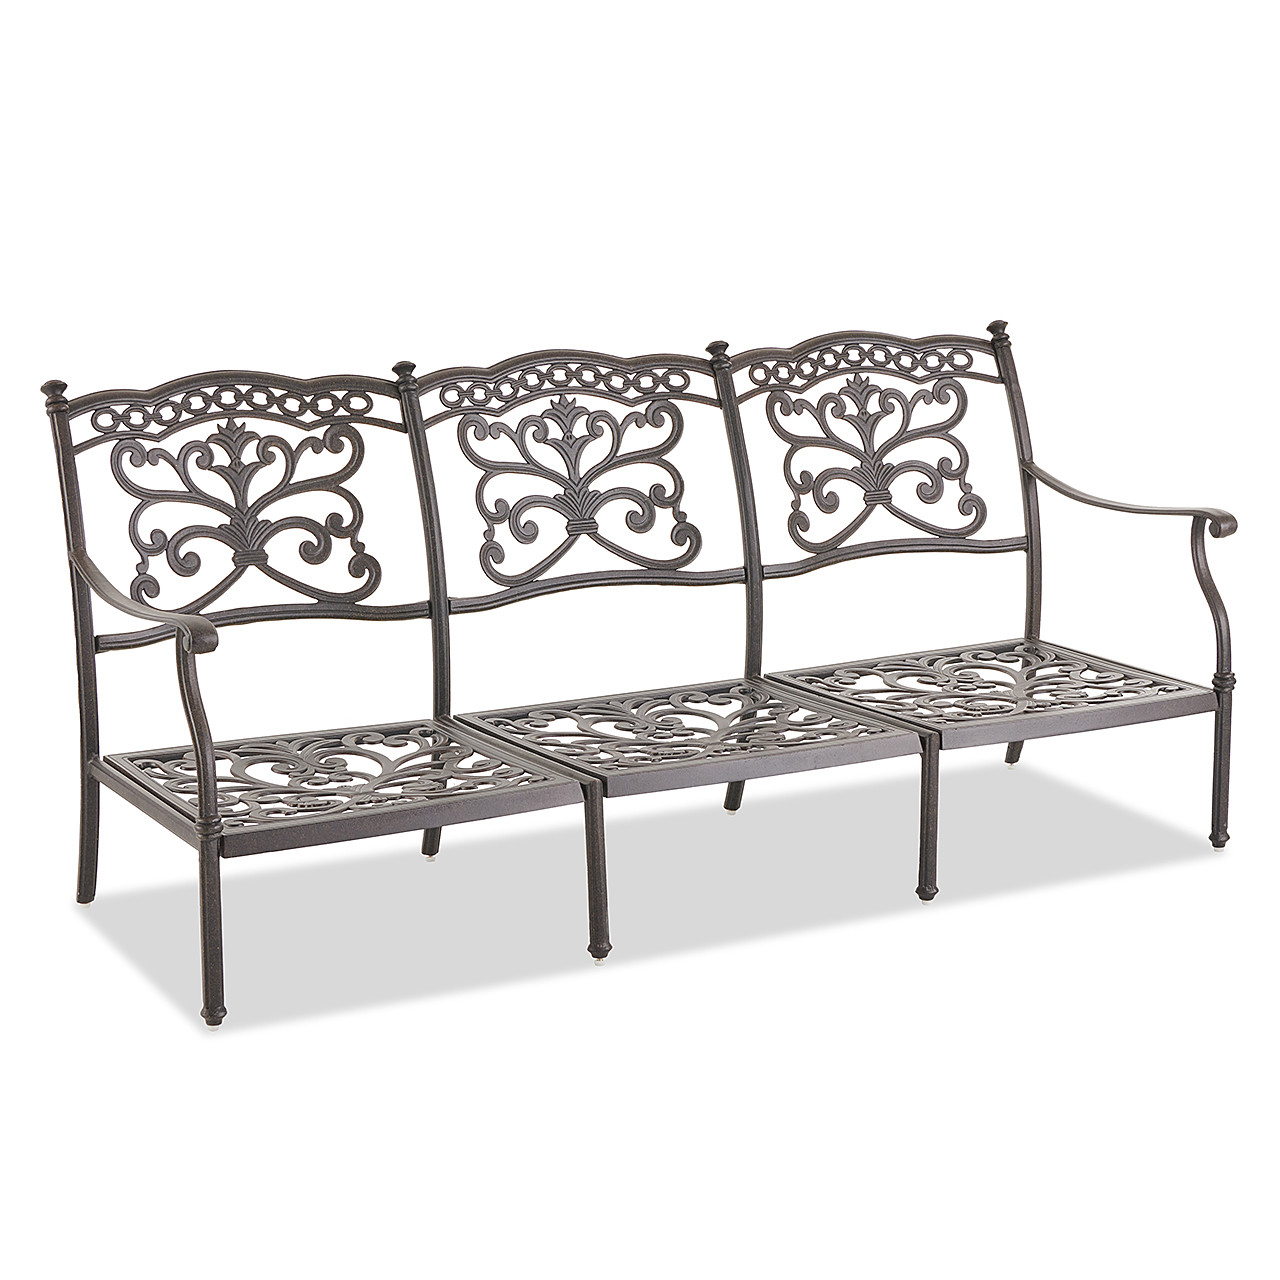 Milan Aged Bronze Cast Aluminum with Cushions 3 Piece Sofa Group + 45 x 24 in. Coffee Table